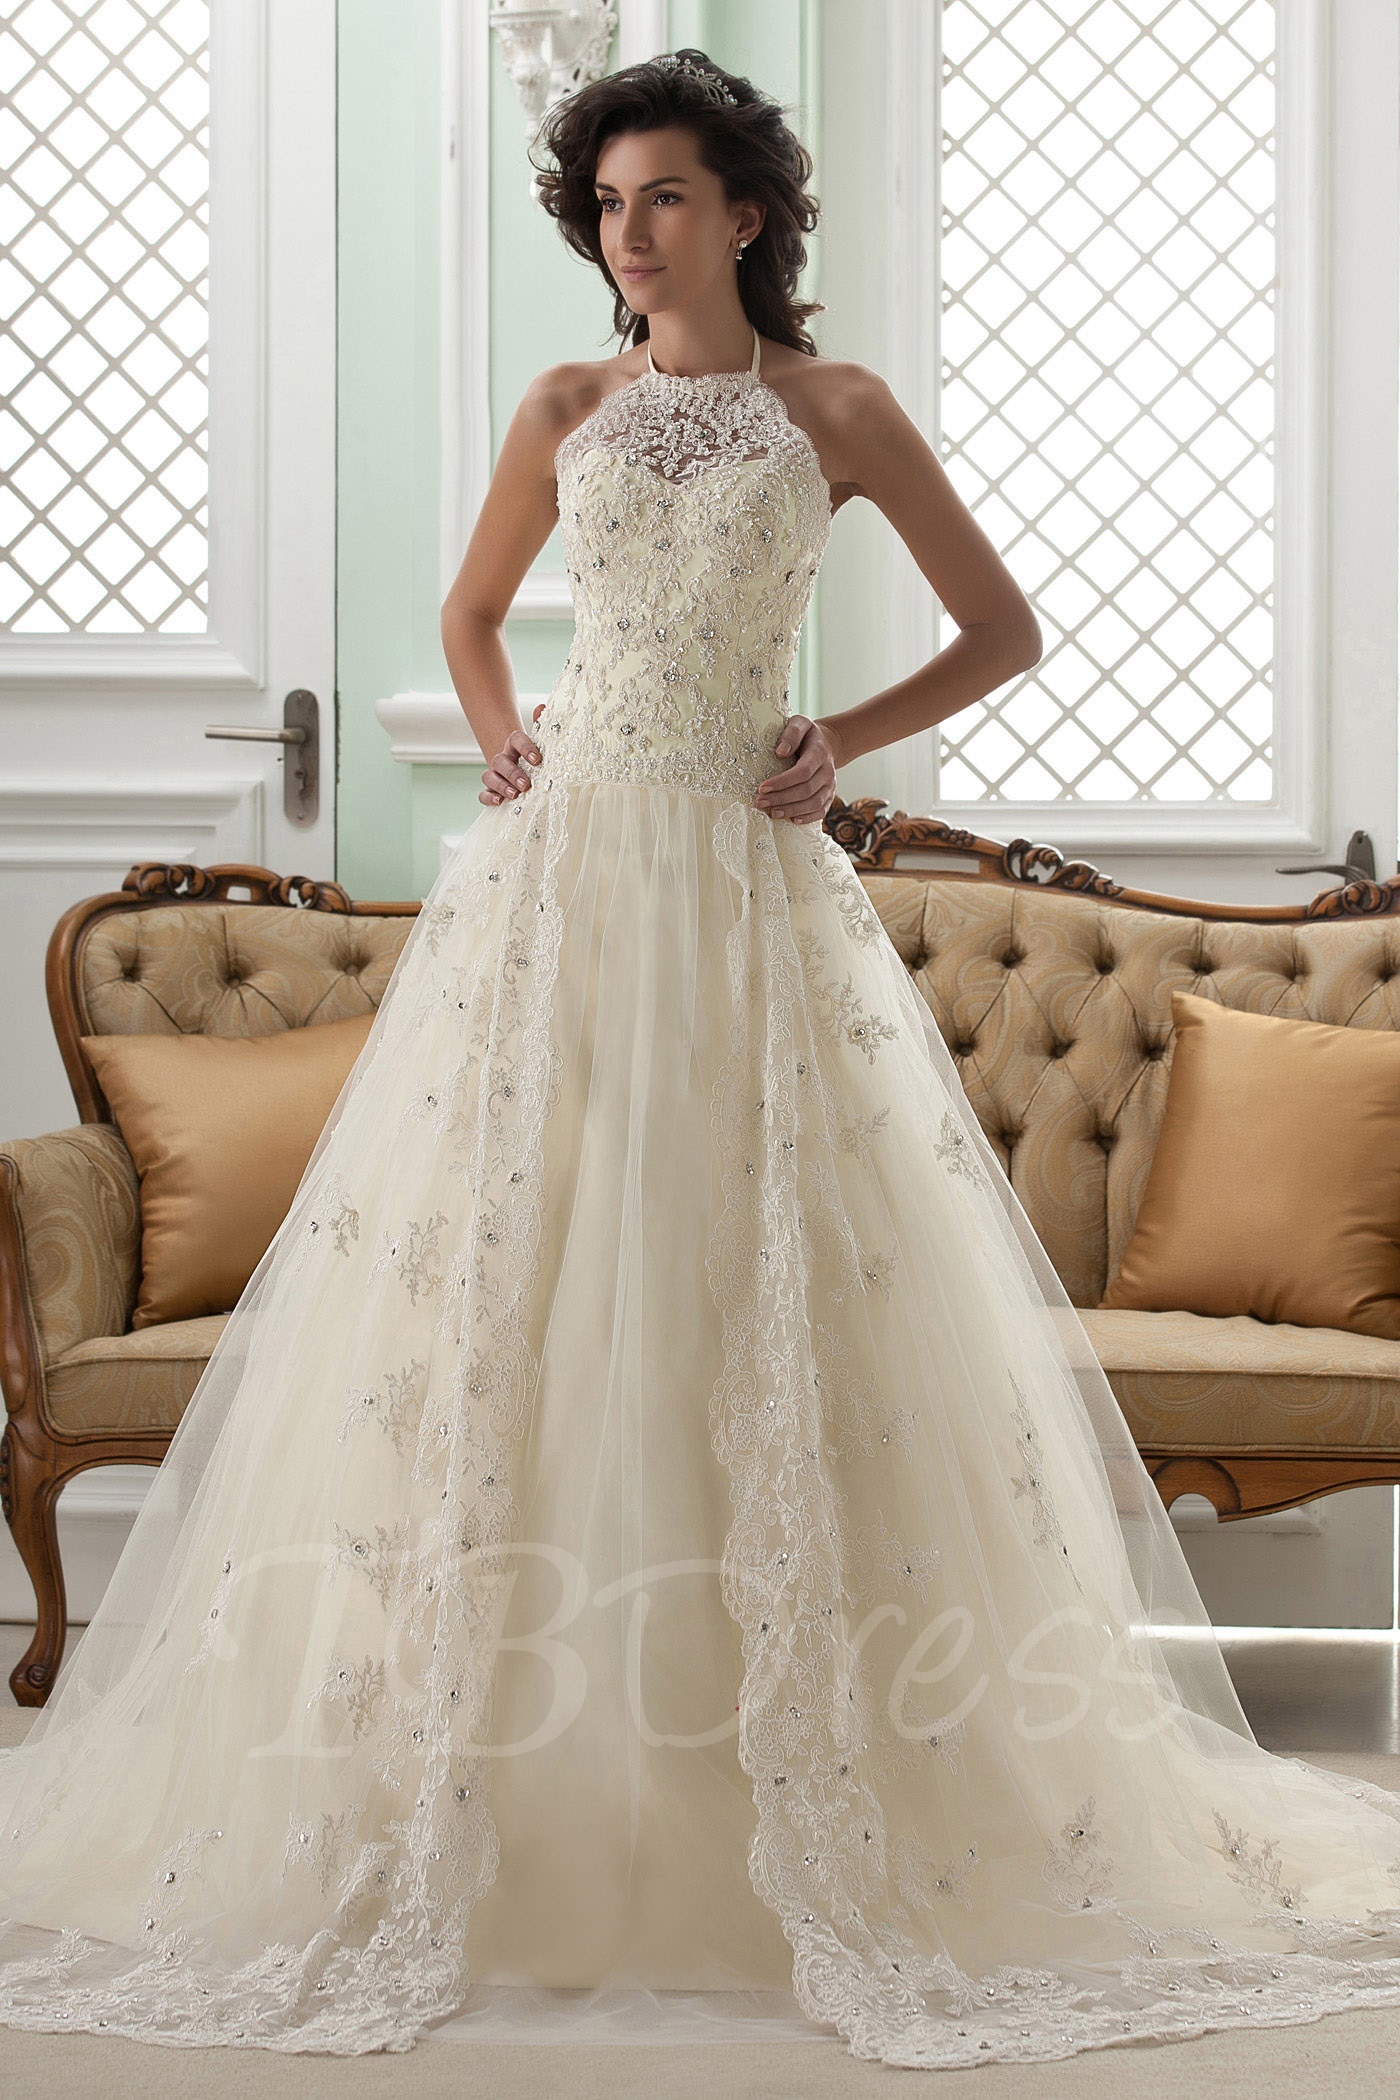 Lace wedding dress – All that you want to know – StyleSkier.com